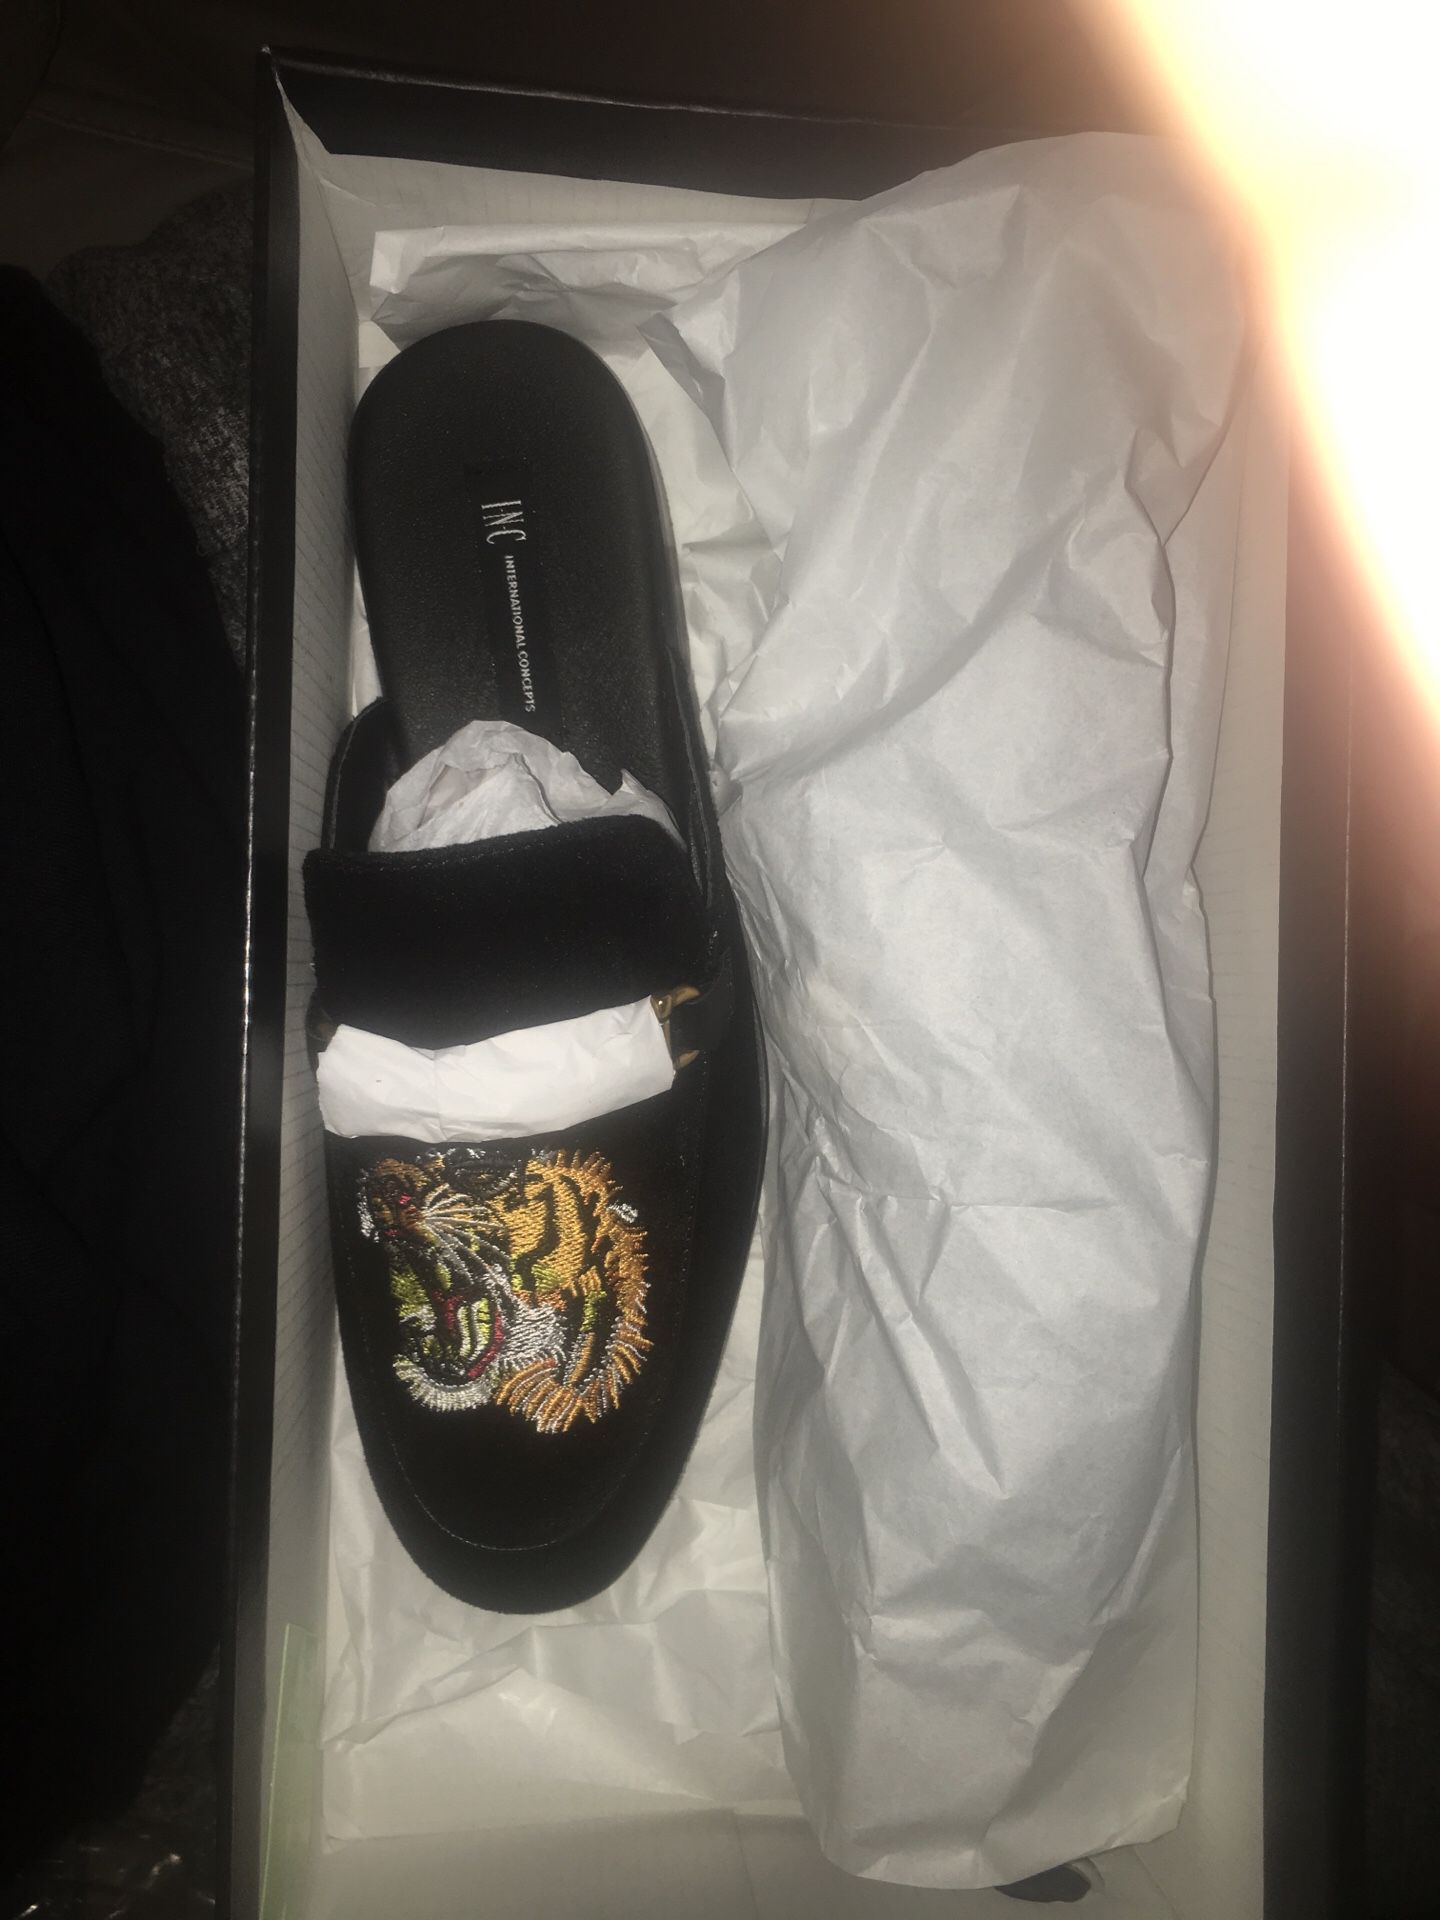 Brand new Gucci Slides/Shoes